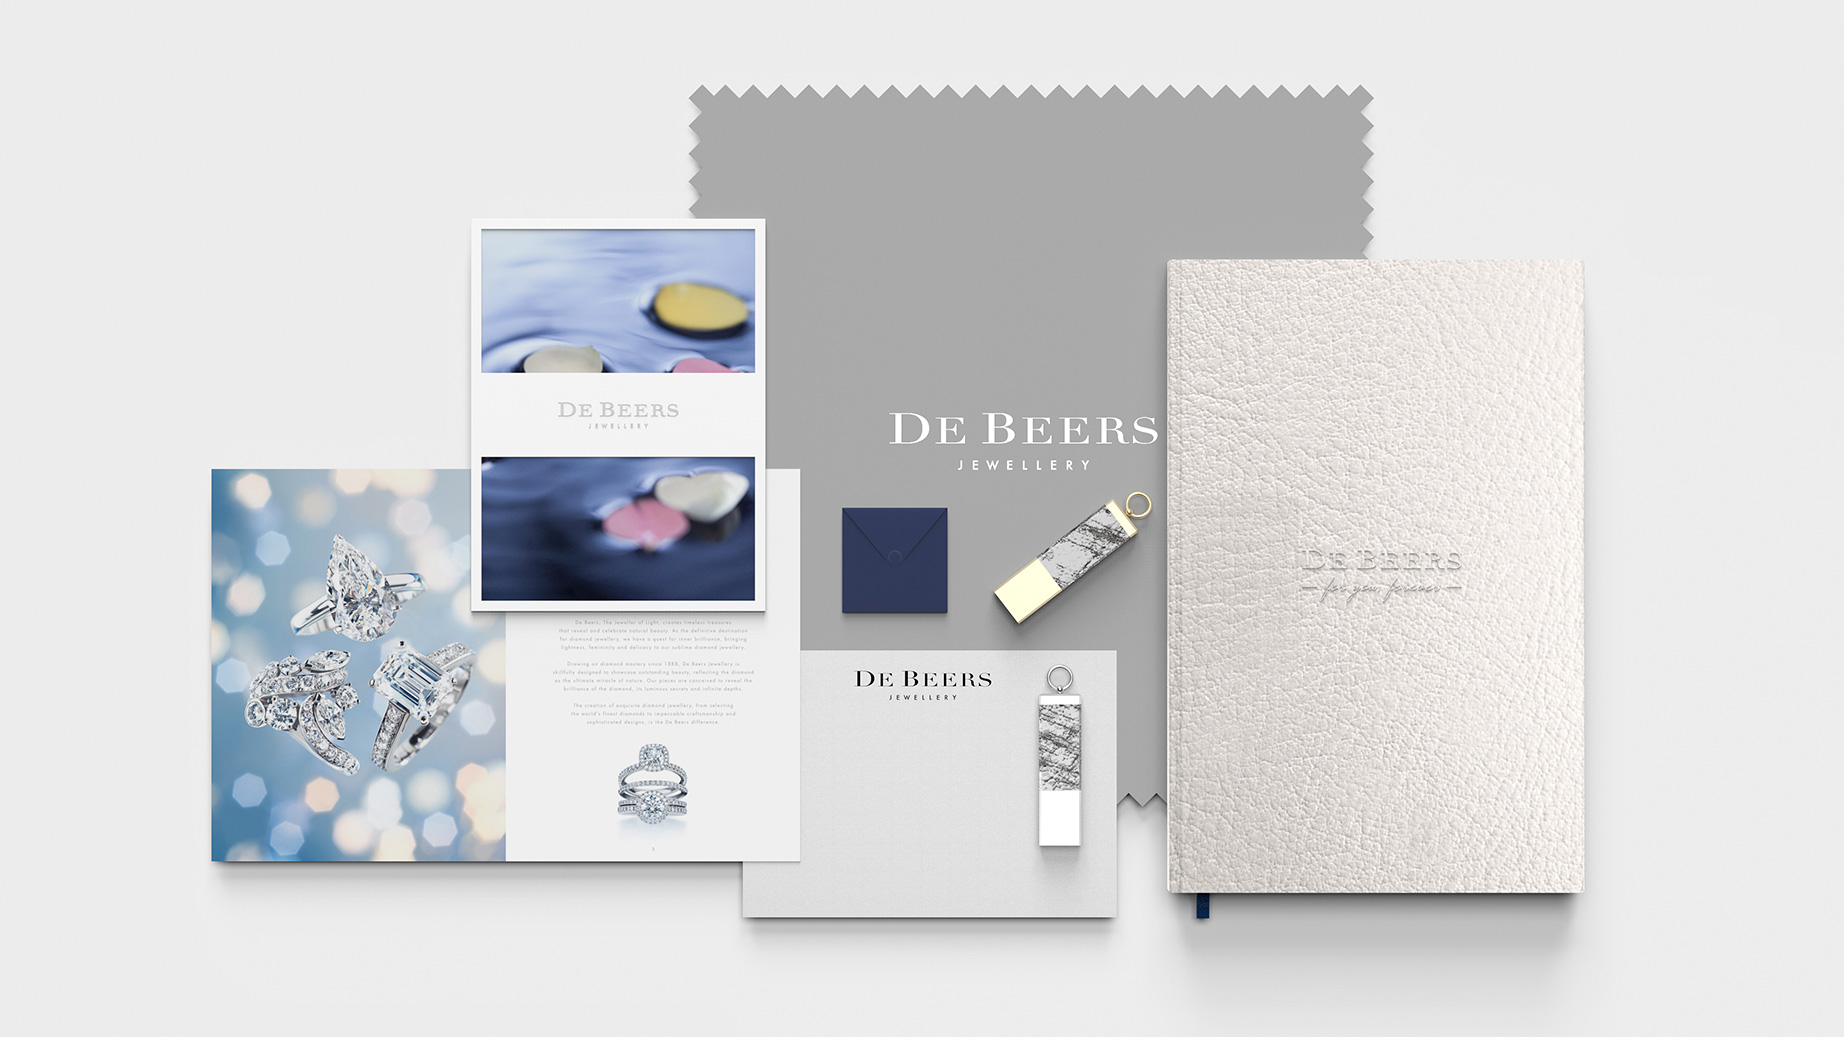 DeBeers Luxury Brand Engagement VIP Printed Marketing Materials and Contents